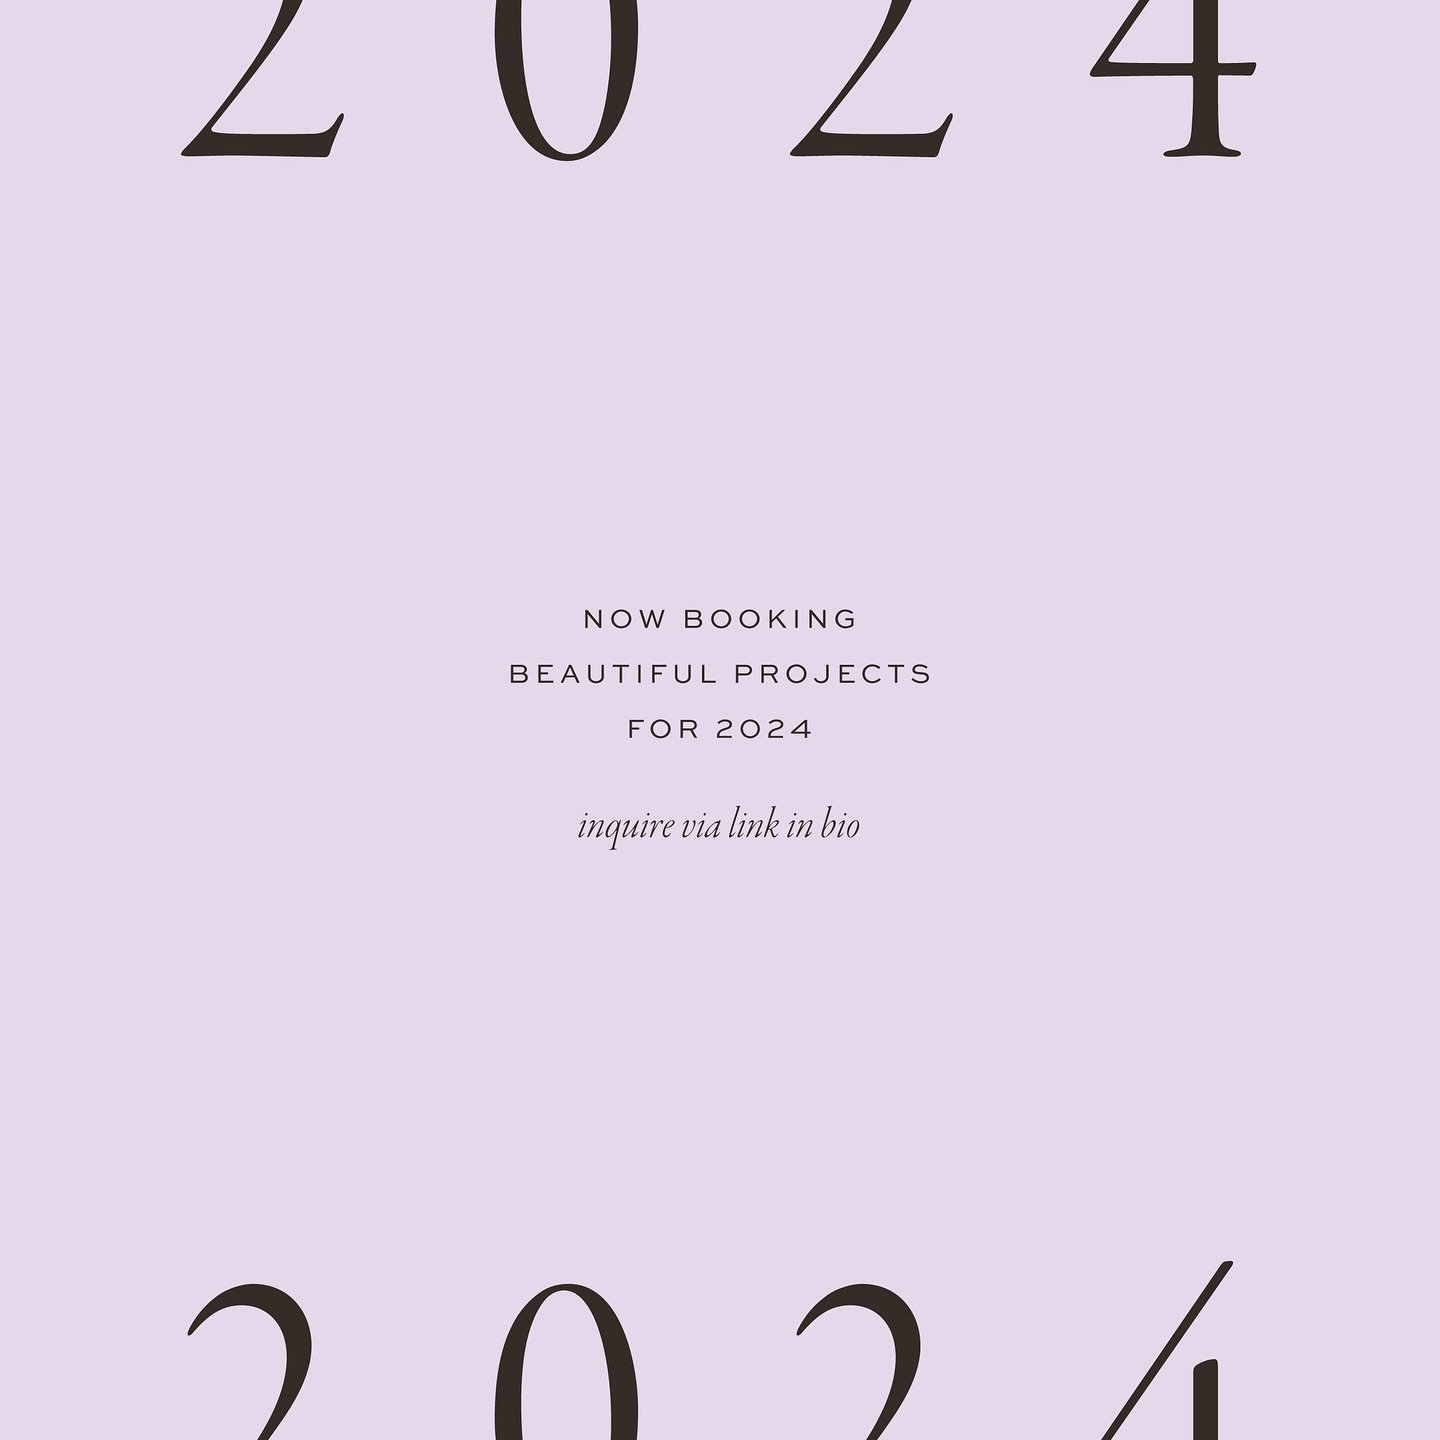 Happy, Happy, Happy New Year! 🤩
My books are open for 2024 and I am so excited for the amazing projects that are filling them up. If opening a business or a new brand or website are on your list of resolutions for the year, I&rsquo;d love to chat! 
